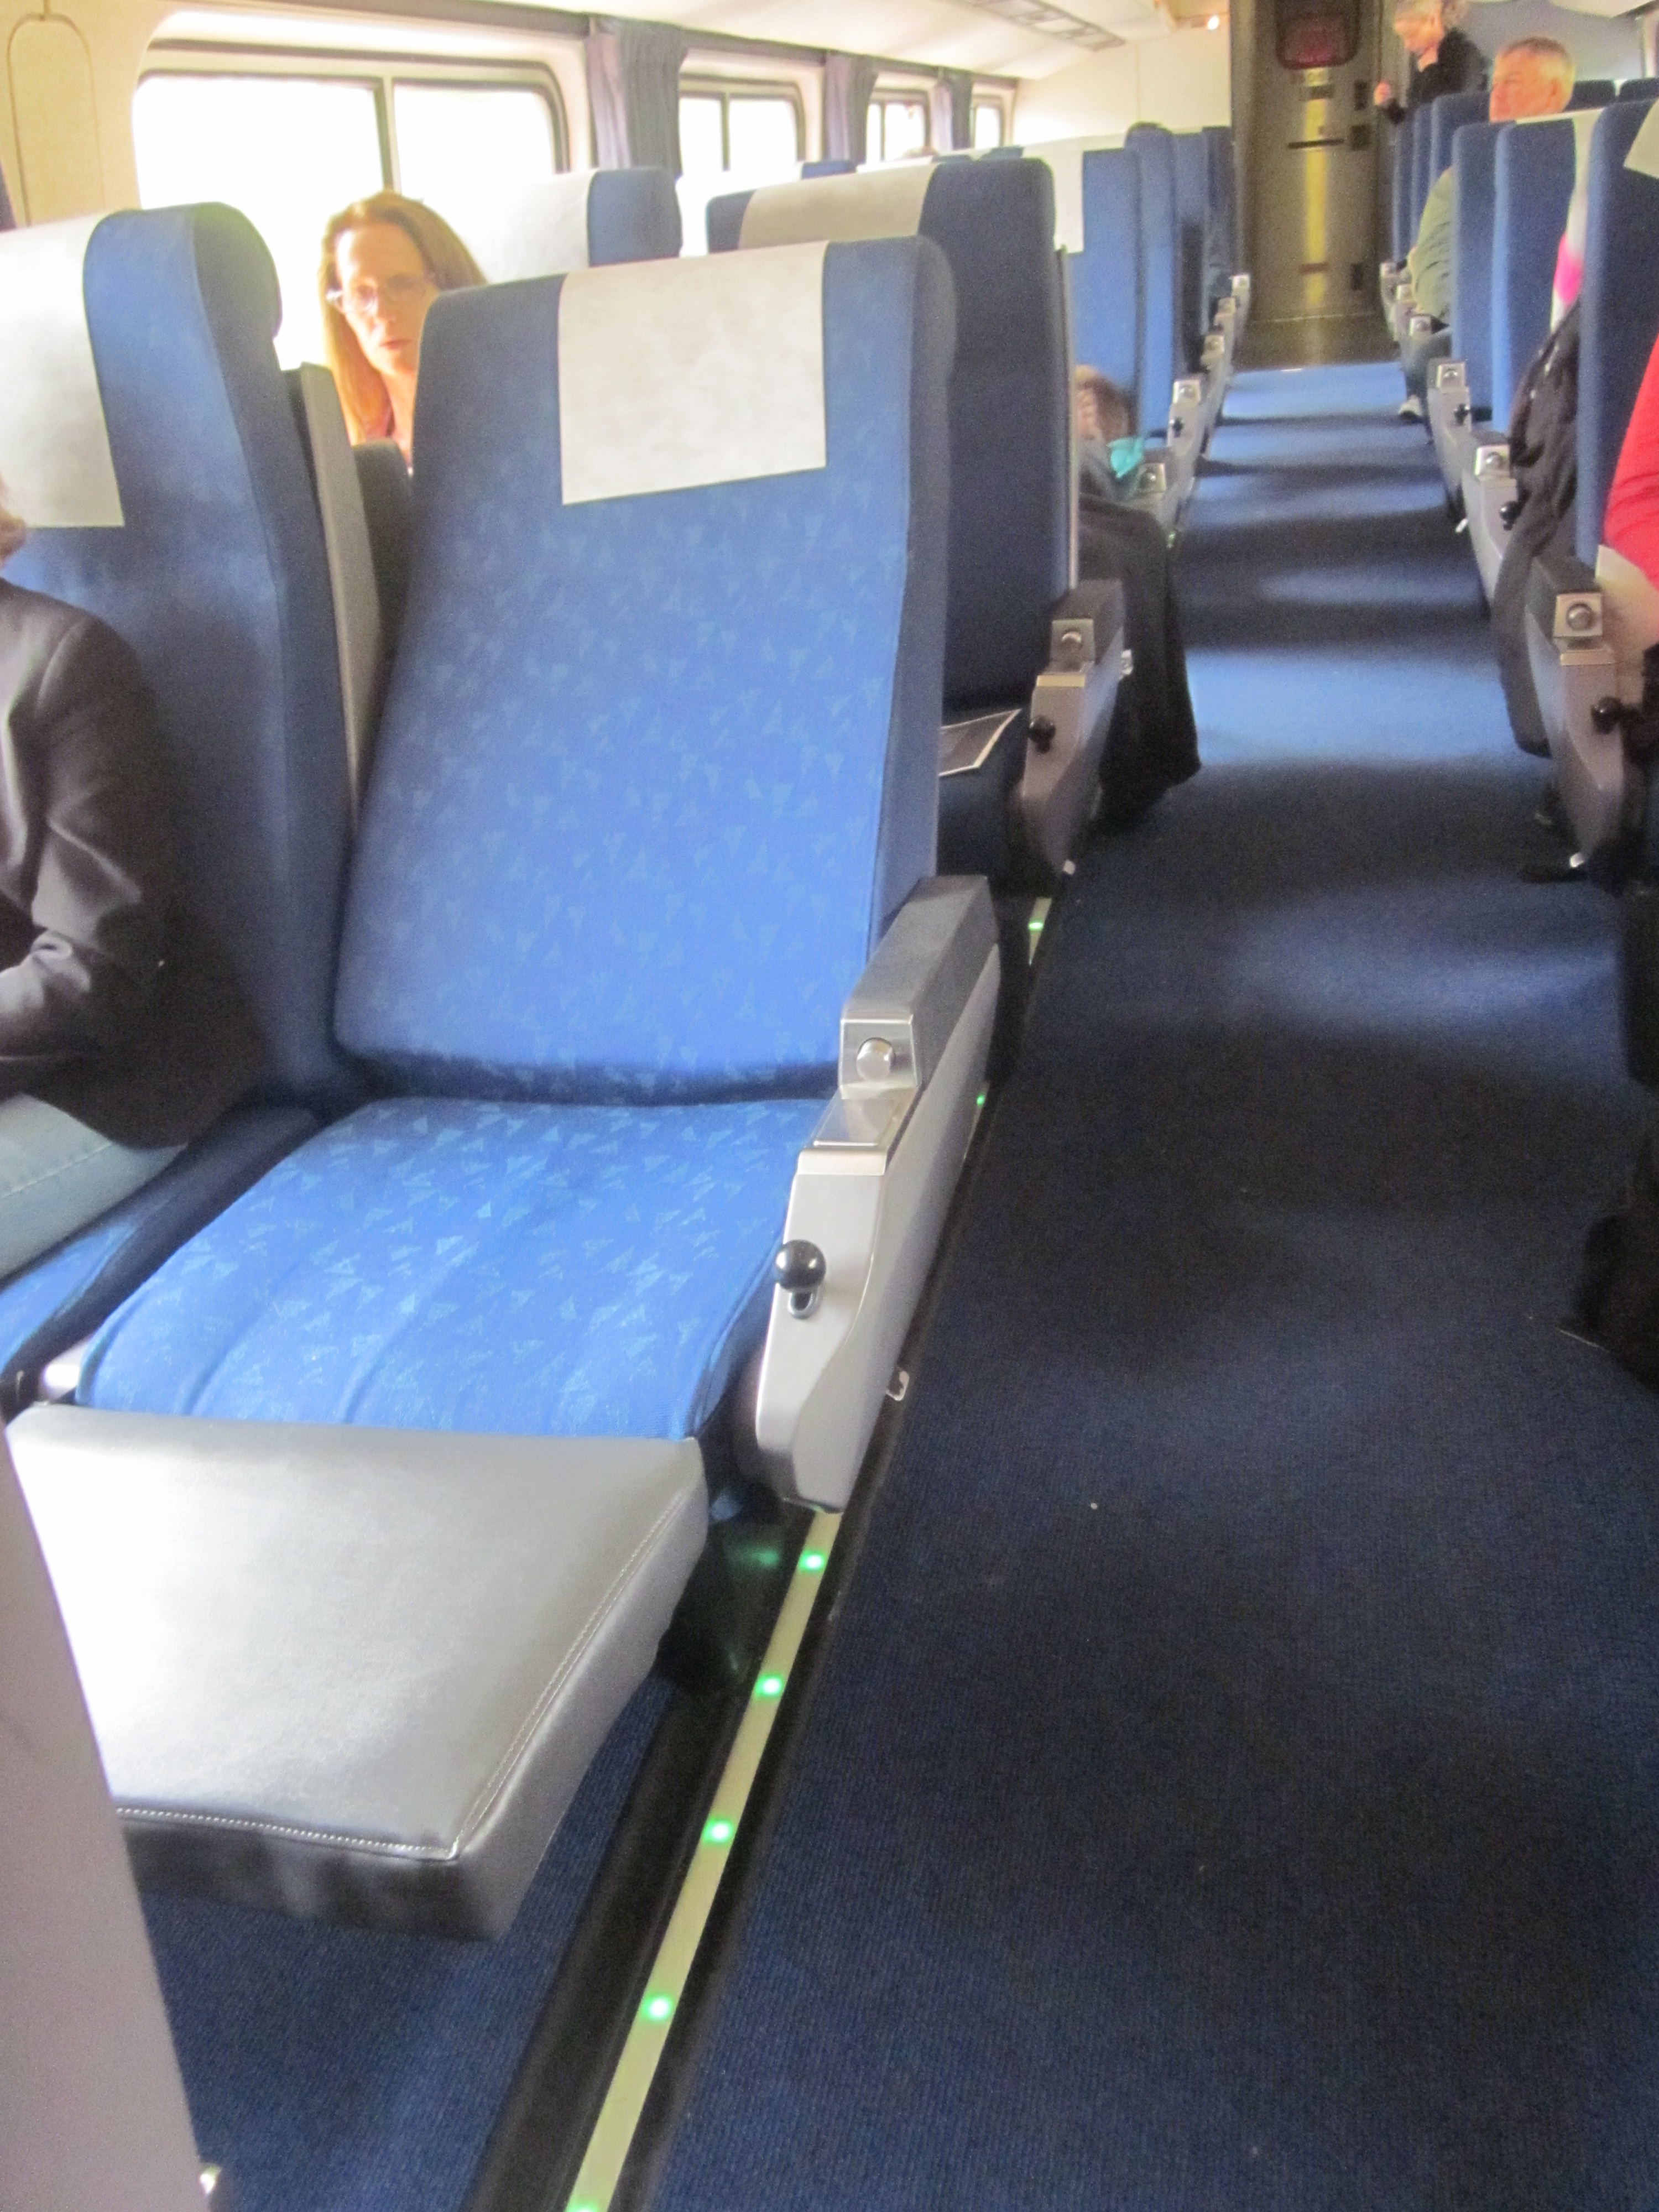 A coach-class seat fully reclined